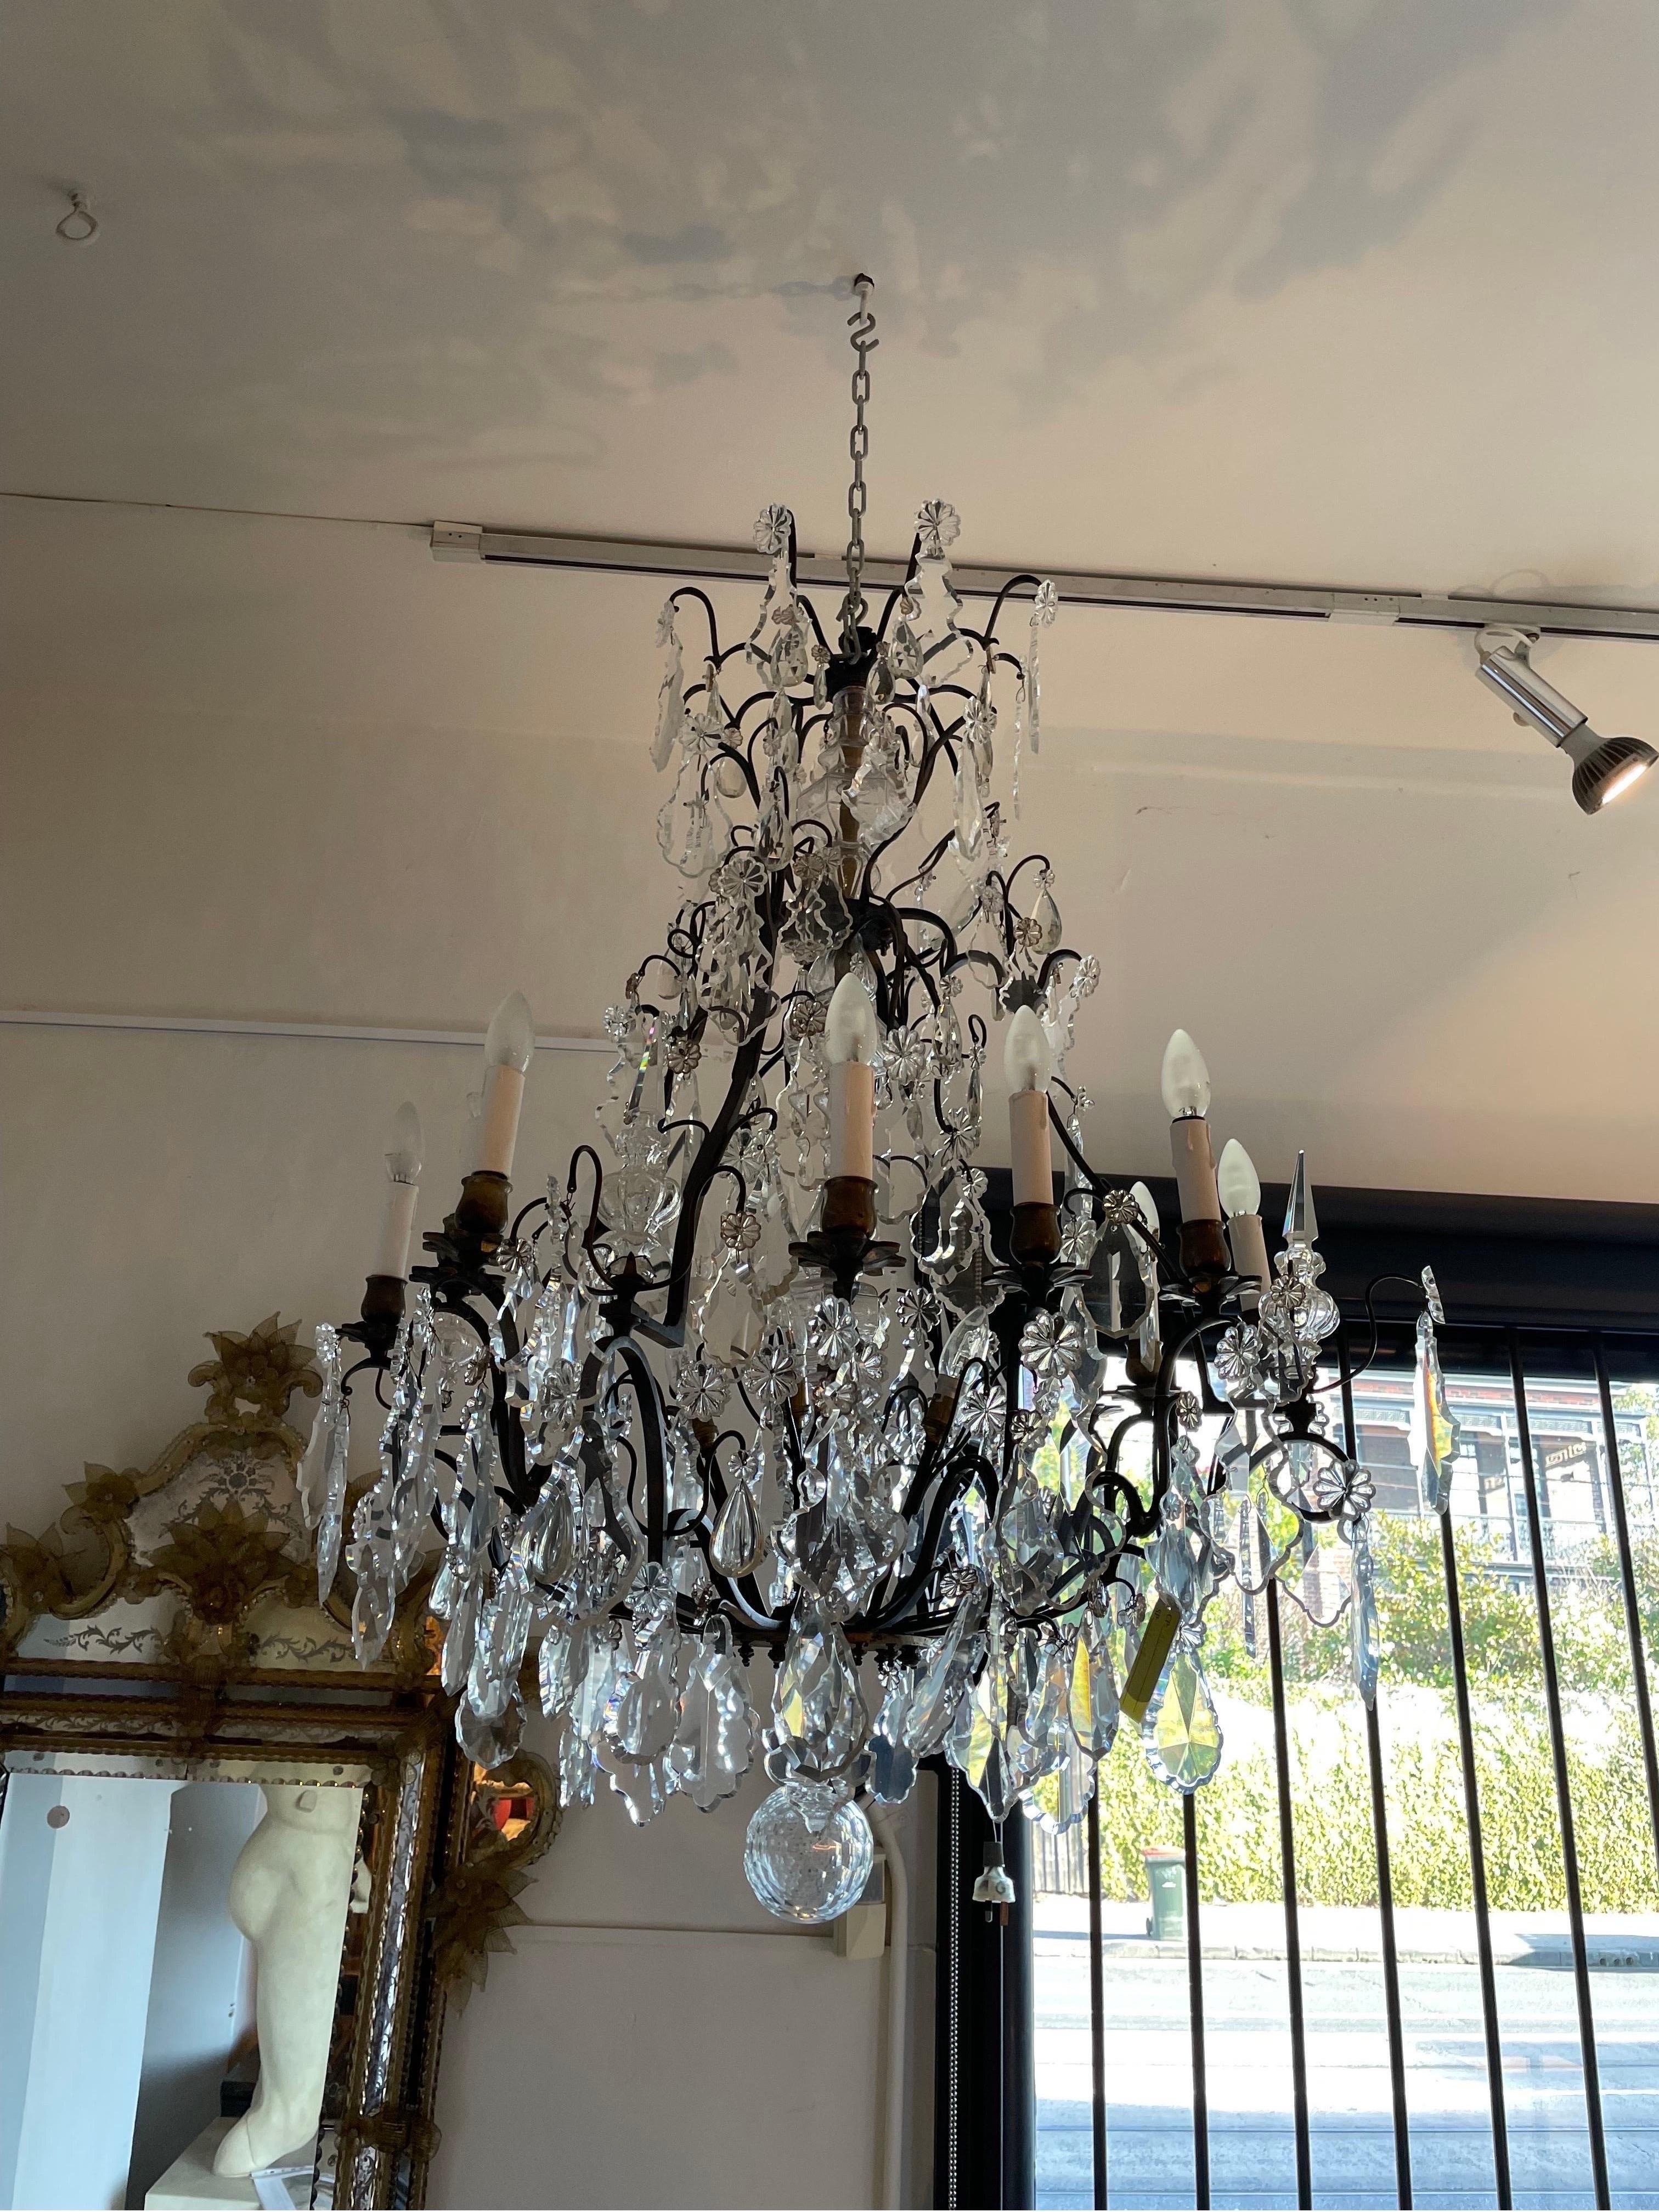 A Louis XV Style Cut Glass Chandelier, Late 19th Century / Early 20th Century

with a faceted glass pendant hanging from the center.

Provenance: Private Melbourne Collection.